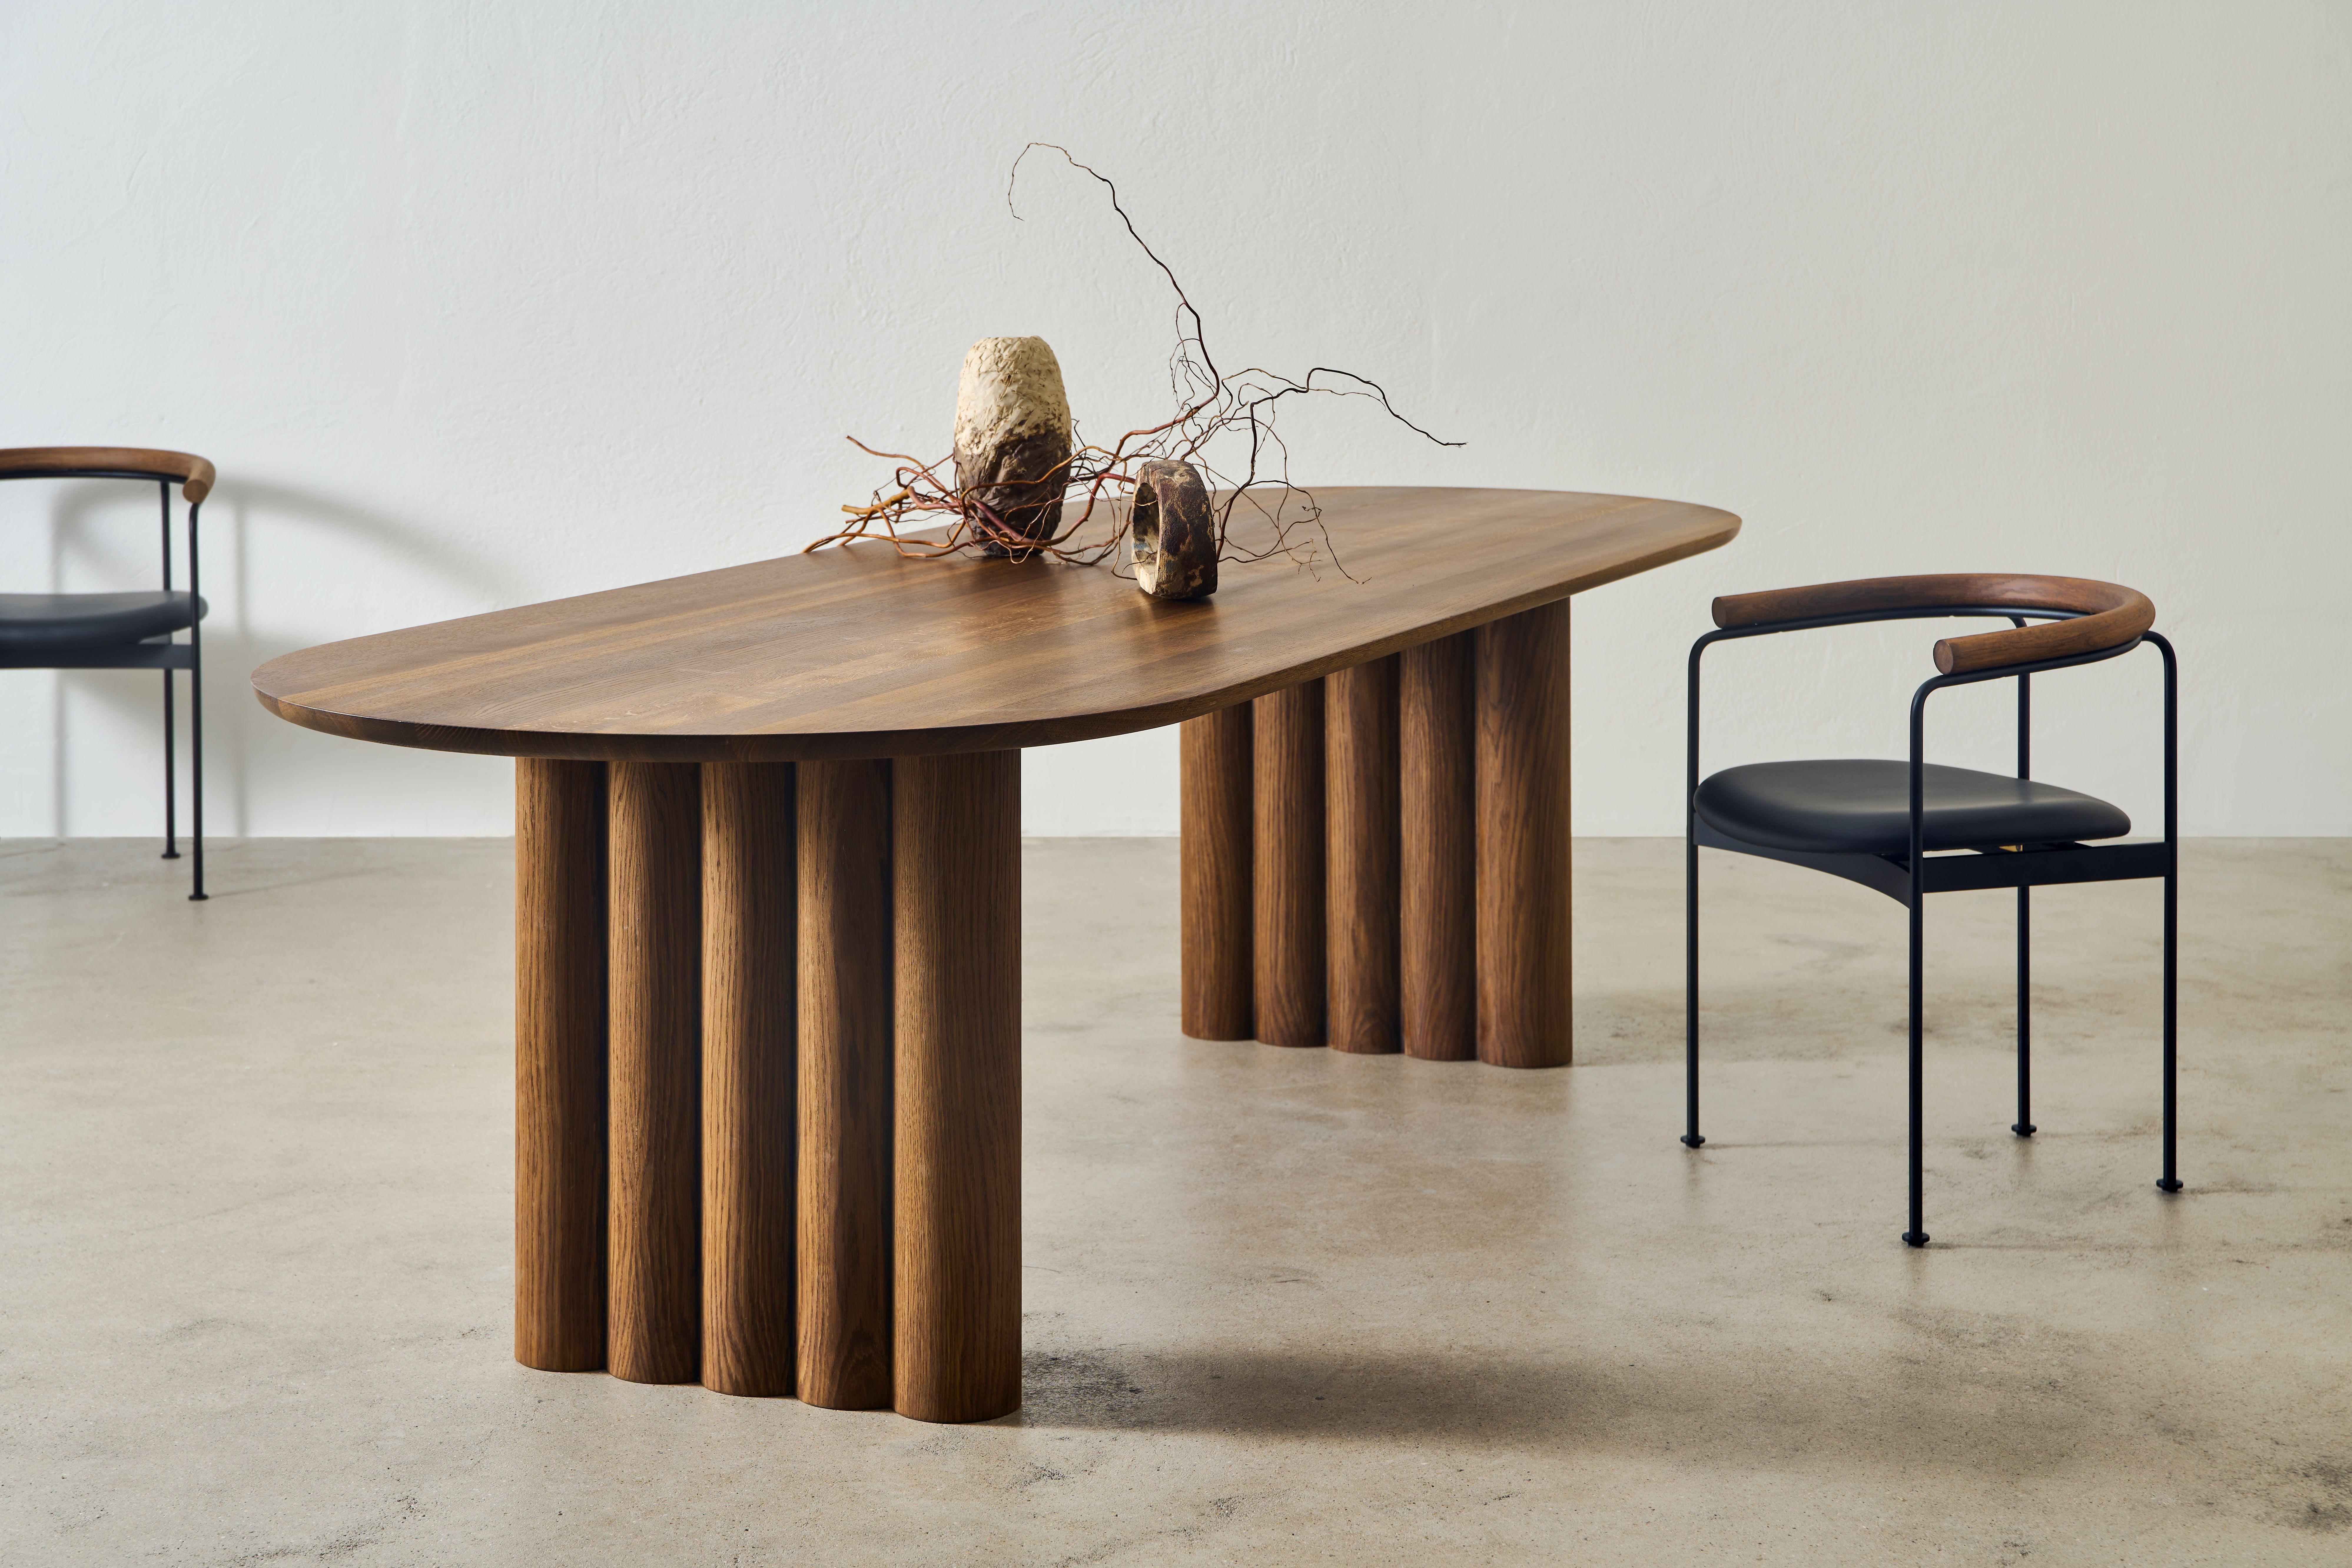 PLUSH dining table, oval, 240 cm.
Solid wood table top and legs. Handmade in Denmark. 
Signed by Jacob Plejdrup for DK3

Table's height: 72 or 74 cm
Table top’s thickness: 30-40mm
Legs width: 130mm or 150mm

Table top dimensions:
– 200 x